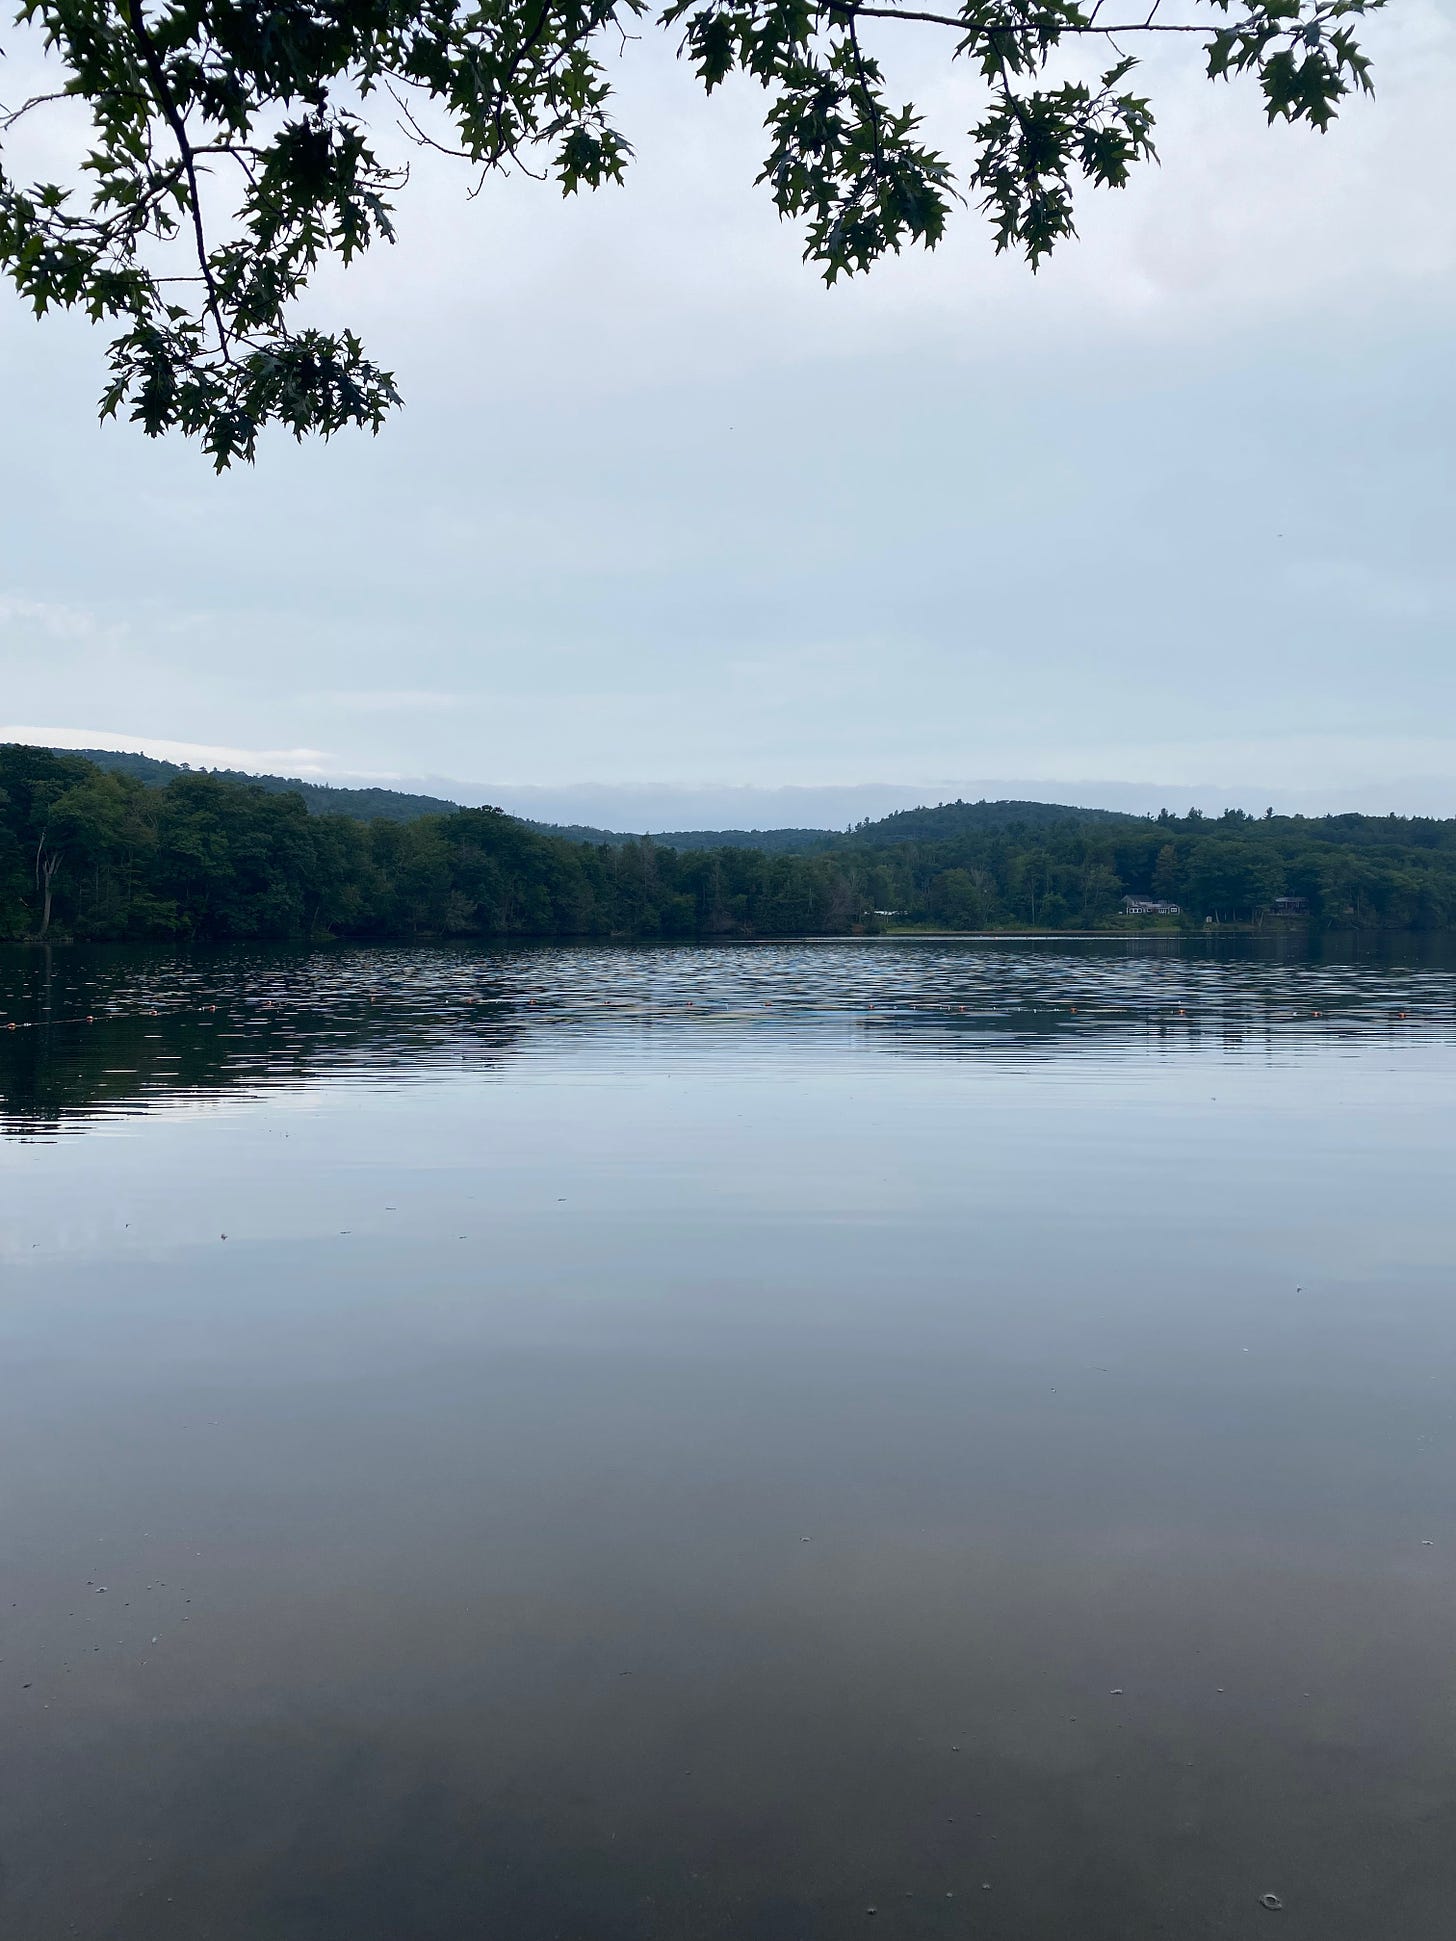 A still lake under a pale blue and cloudy sky. There’s a line of hills beyond the water on the horizon, and a tree branch at the top of the frame.